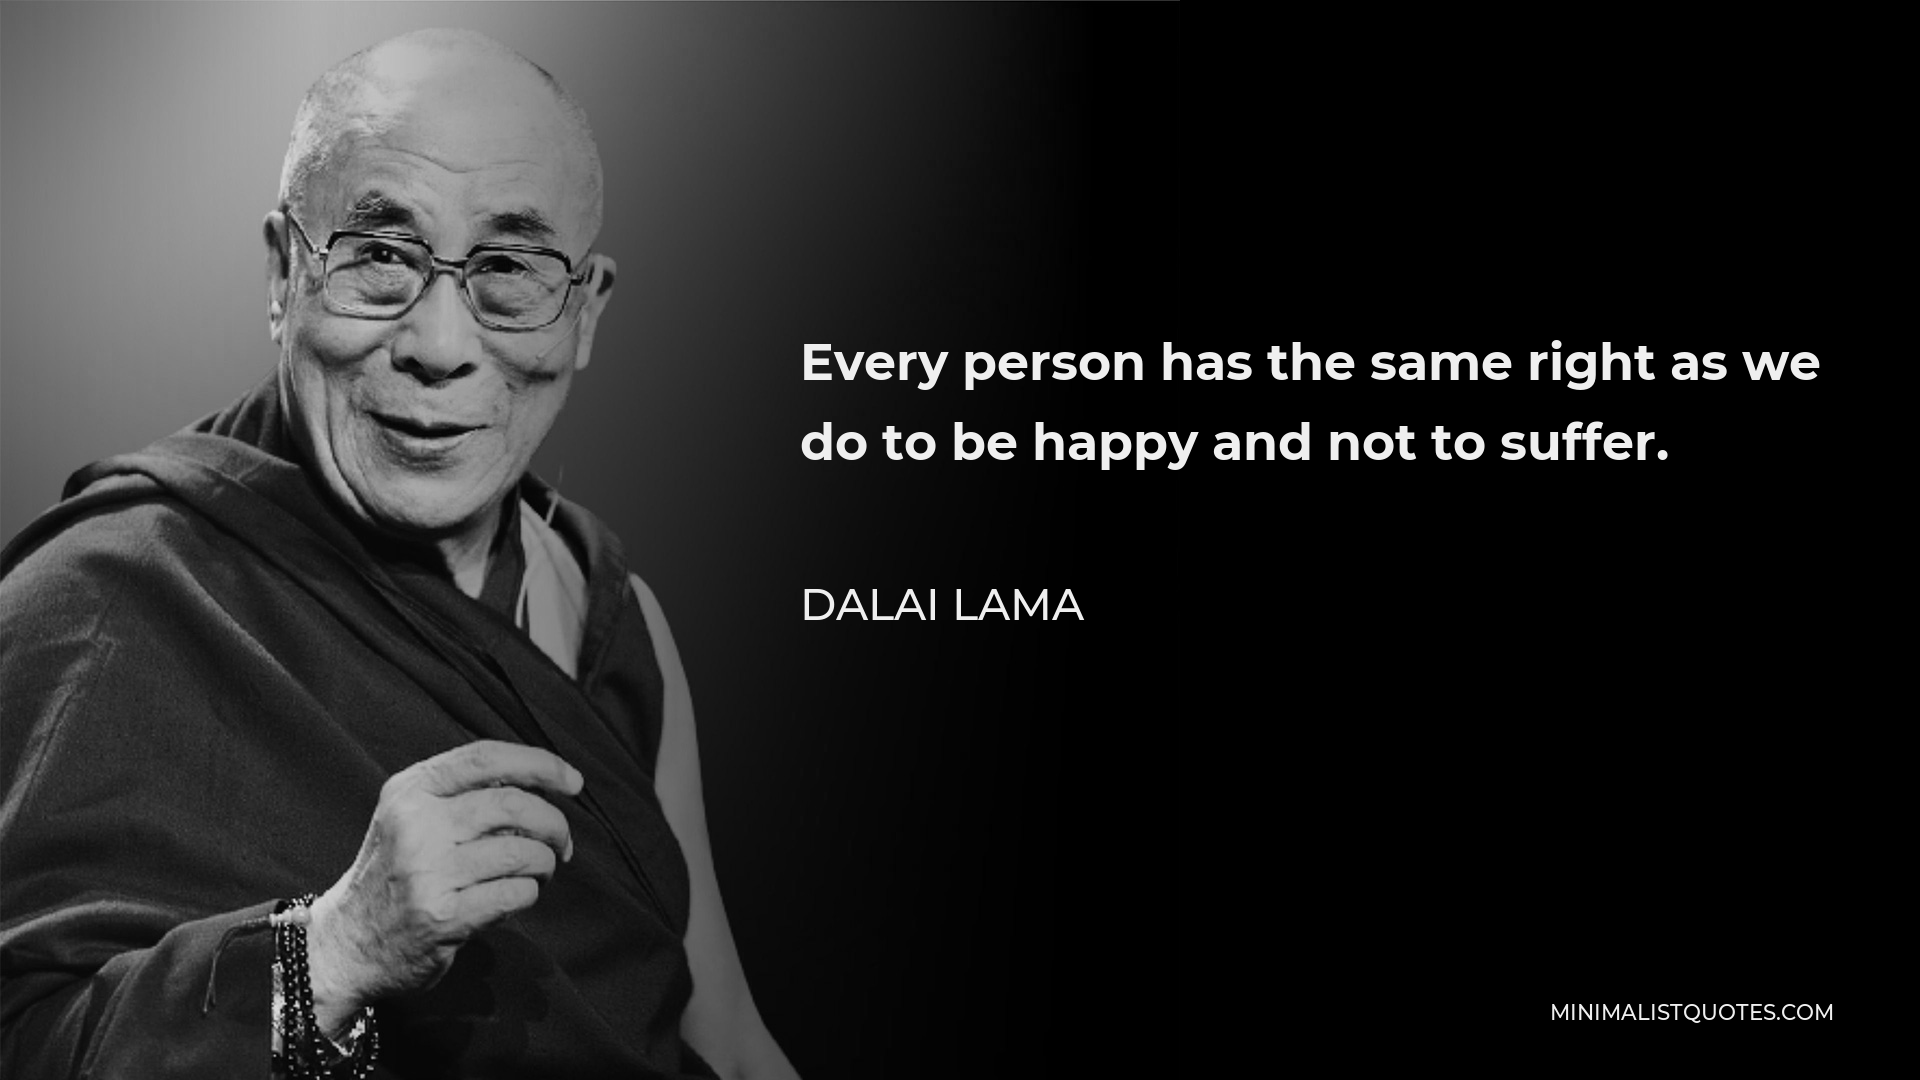 Dalai Lama Quote - Every person has the same right as we do to be happy and not to suffer.